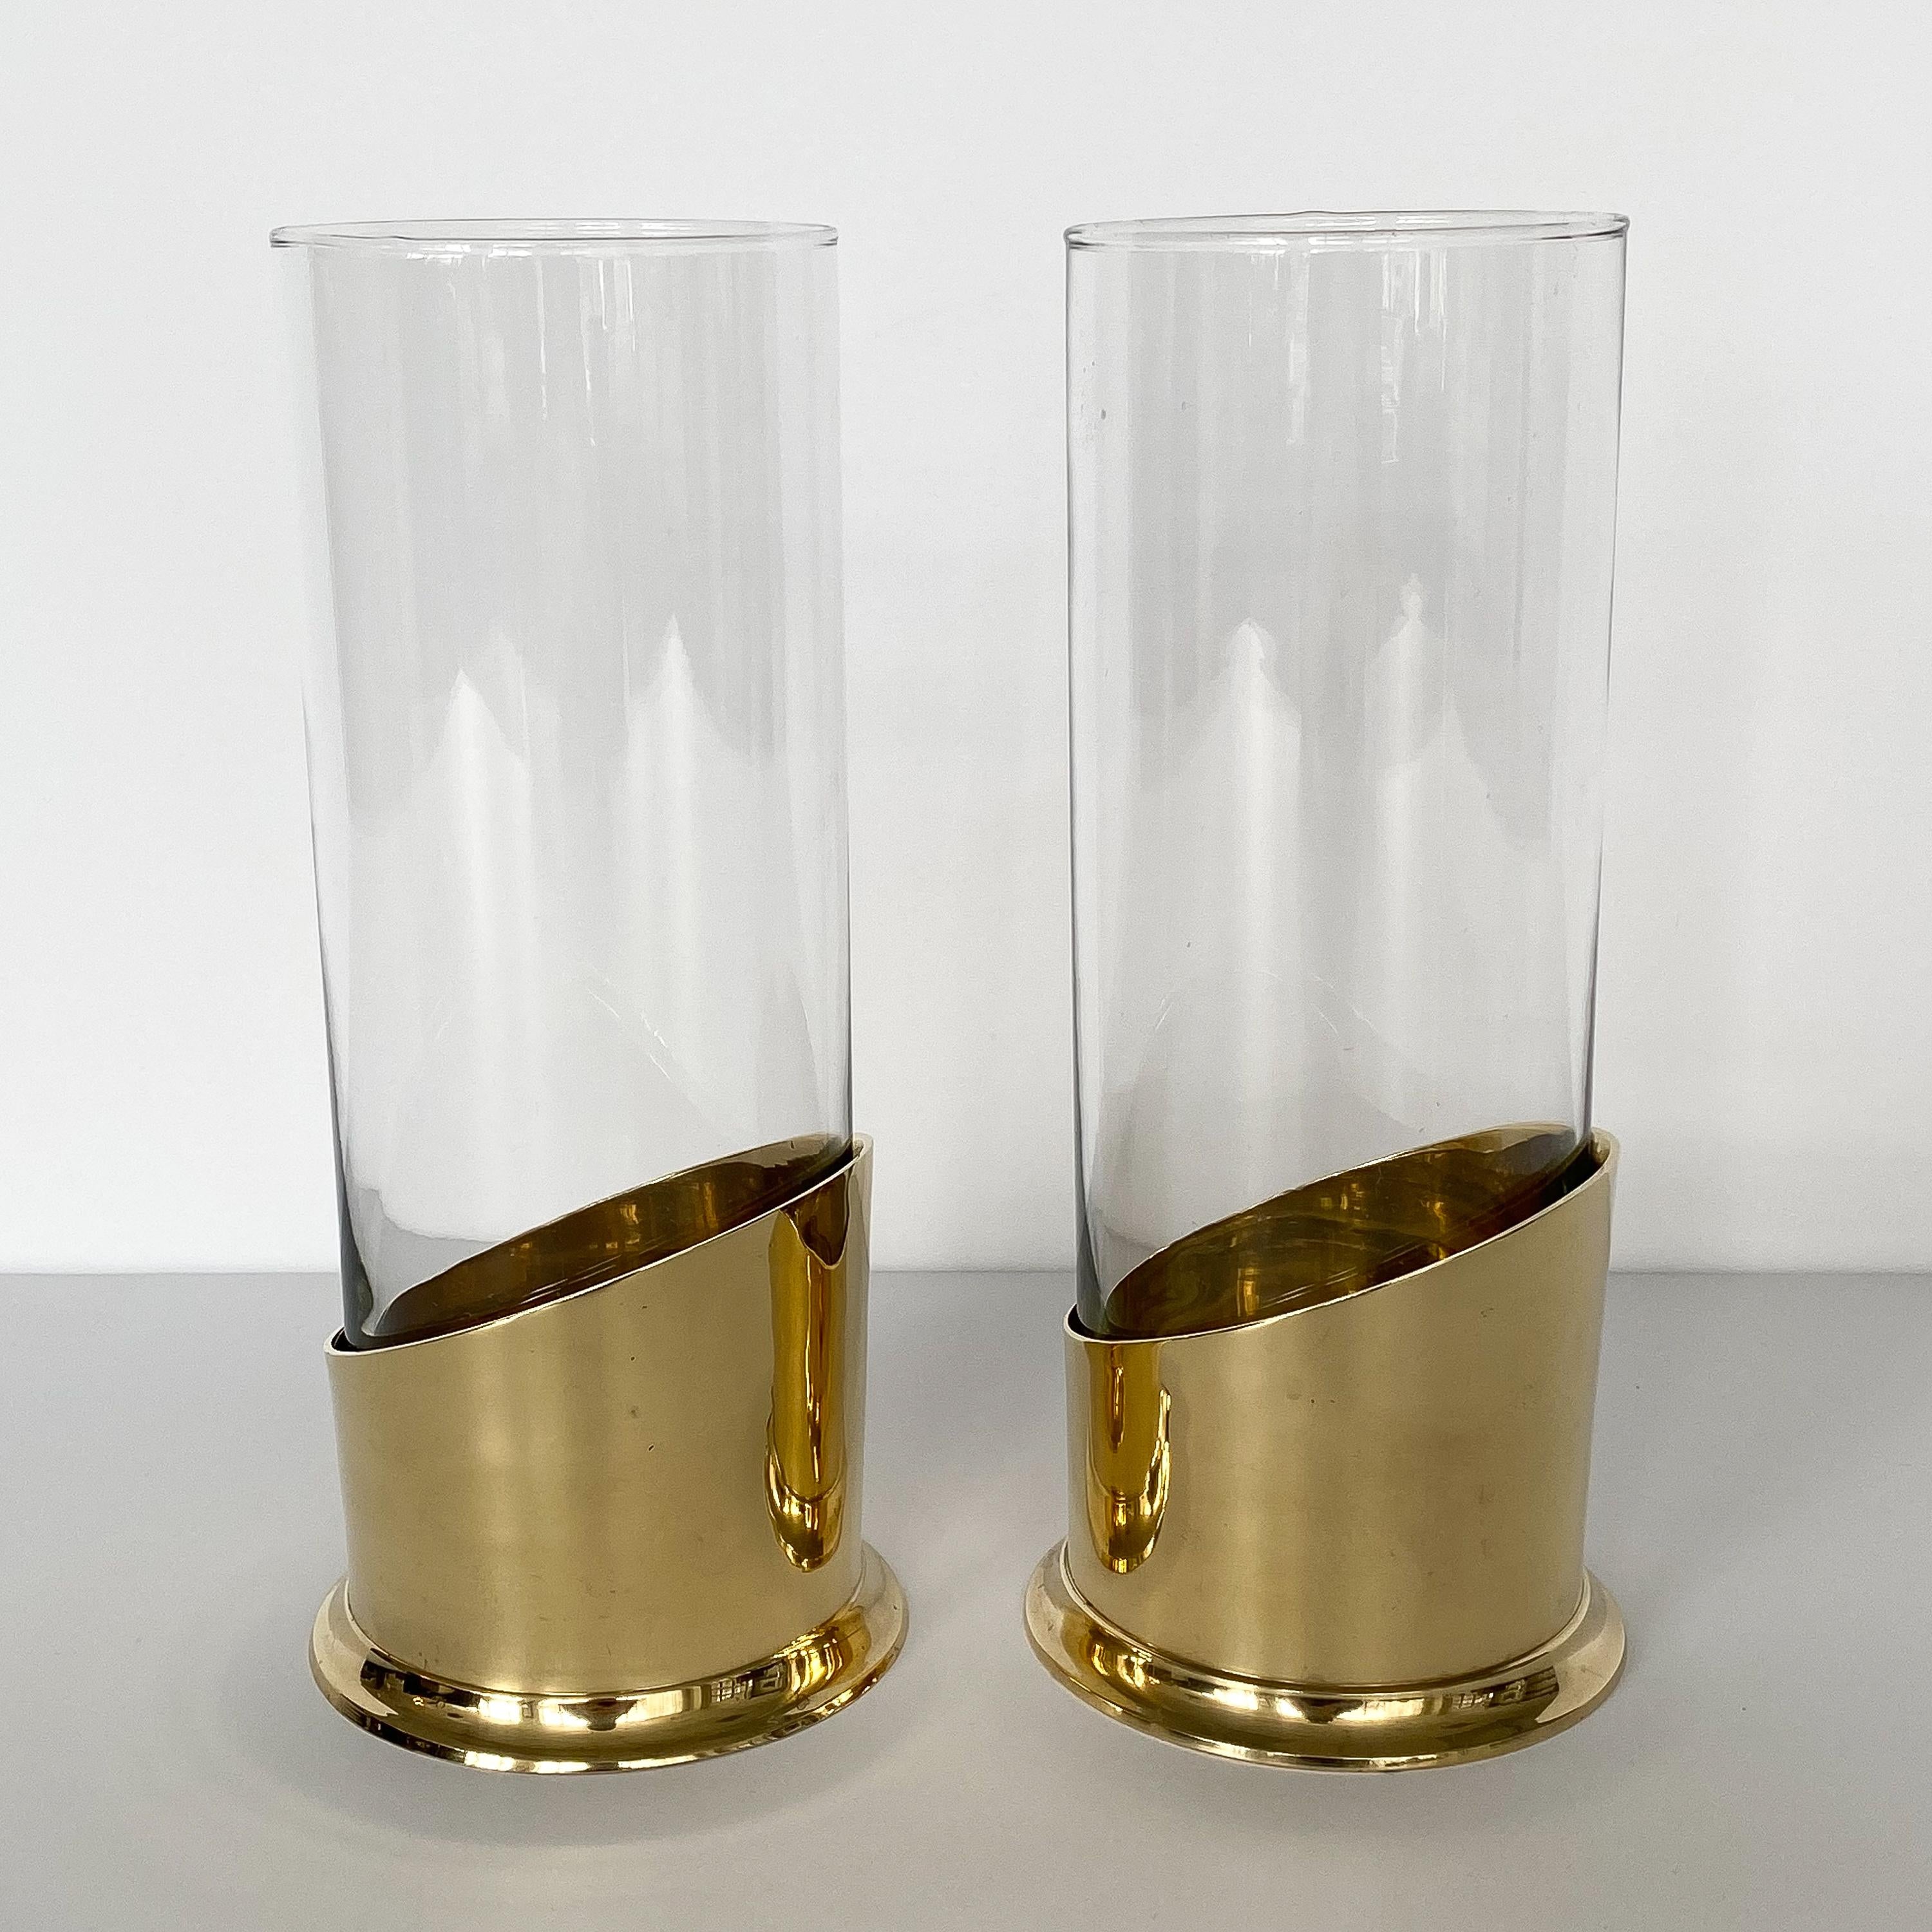 American Pair of Brass and Glass Hurricane Candleholders / Vases